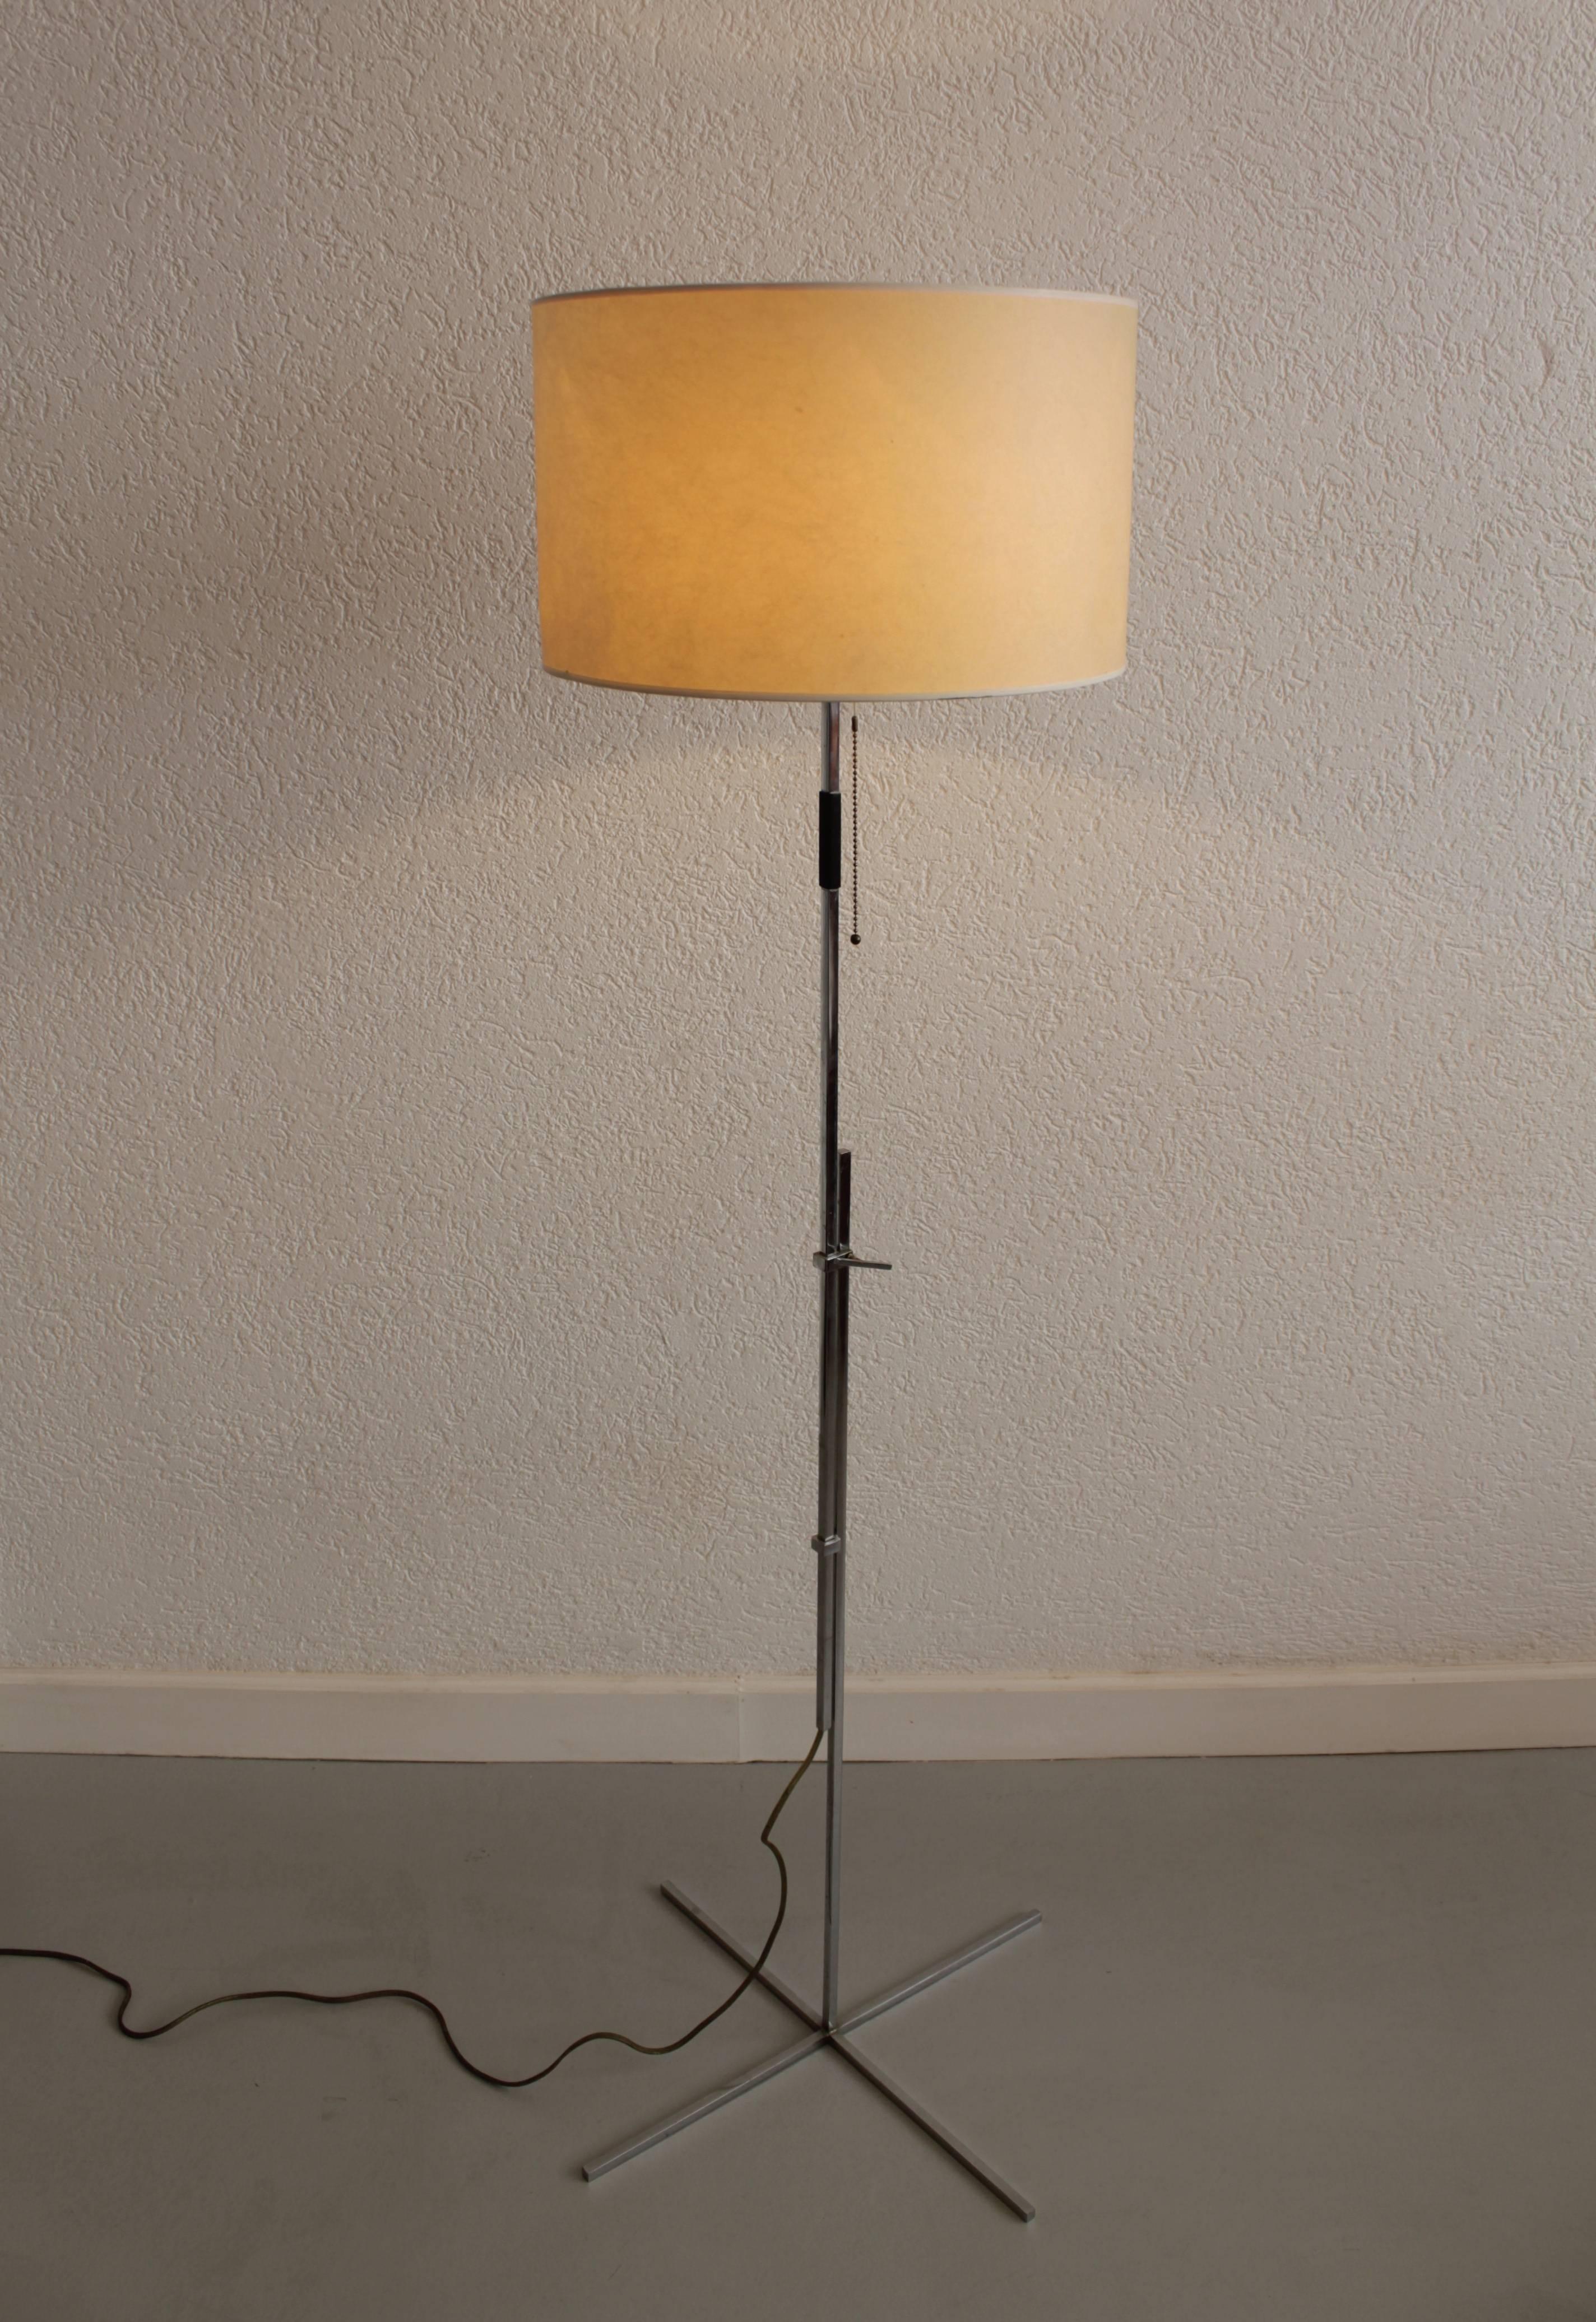 Hans Eichenberger steel and parchment paper floor lamp, Switzerland, circa 1960s.
Adjustable height from 120 to 165 cm
Paper shade
Very good condition.